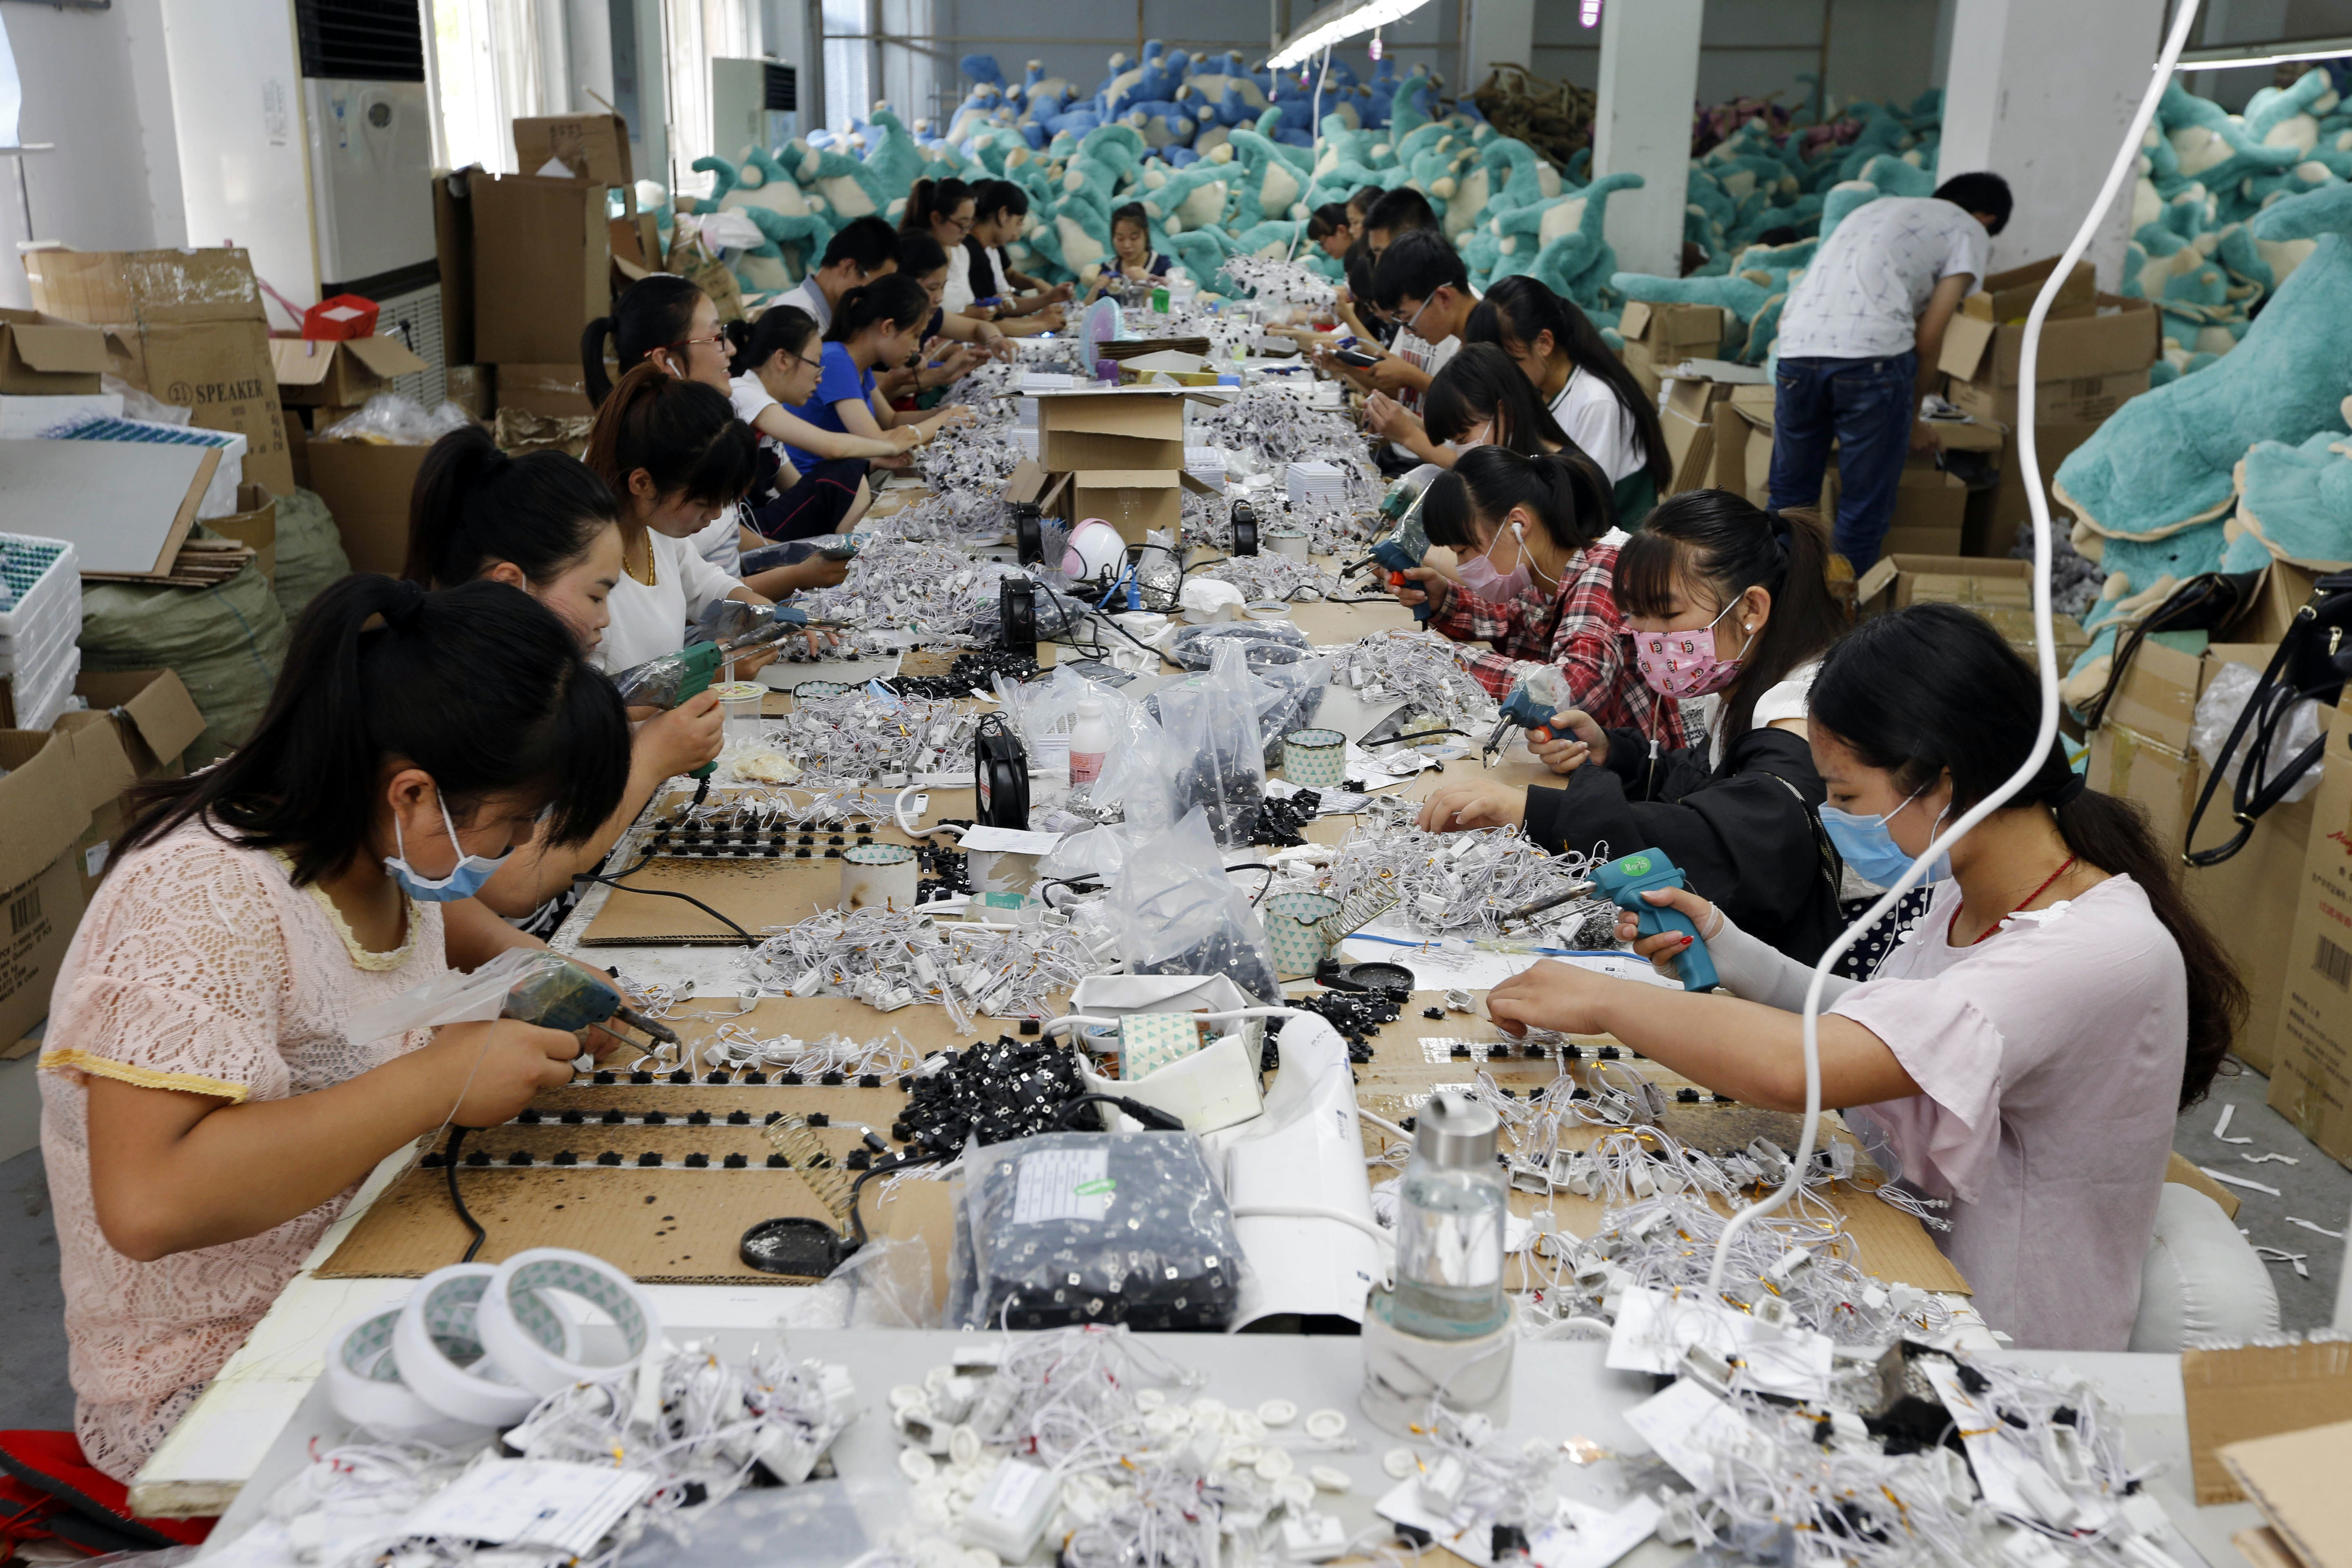 This photo taken on July 12, 2016 shows workers in the process of making soft toys at a toy factory in Lianyungang, in eastern China's Jiangsu province. China's growth slipped to a new seven-year low of 6.6 percent in the second quarter, according to an AFP survey, despite government efforts to spur activity in the world's second-largest economy. / AFP PHOTO / STR / China OUT